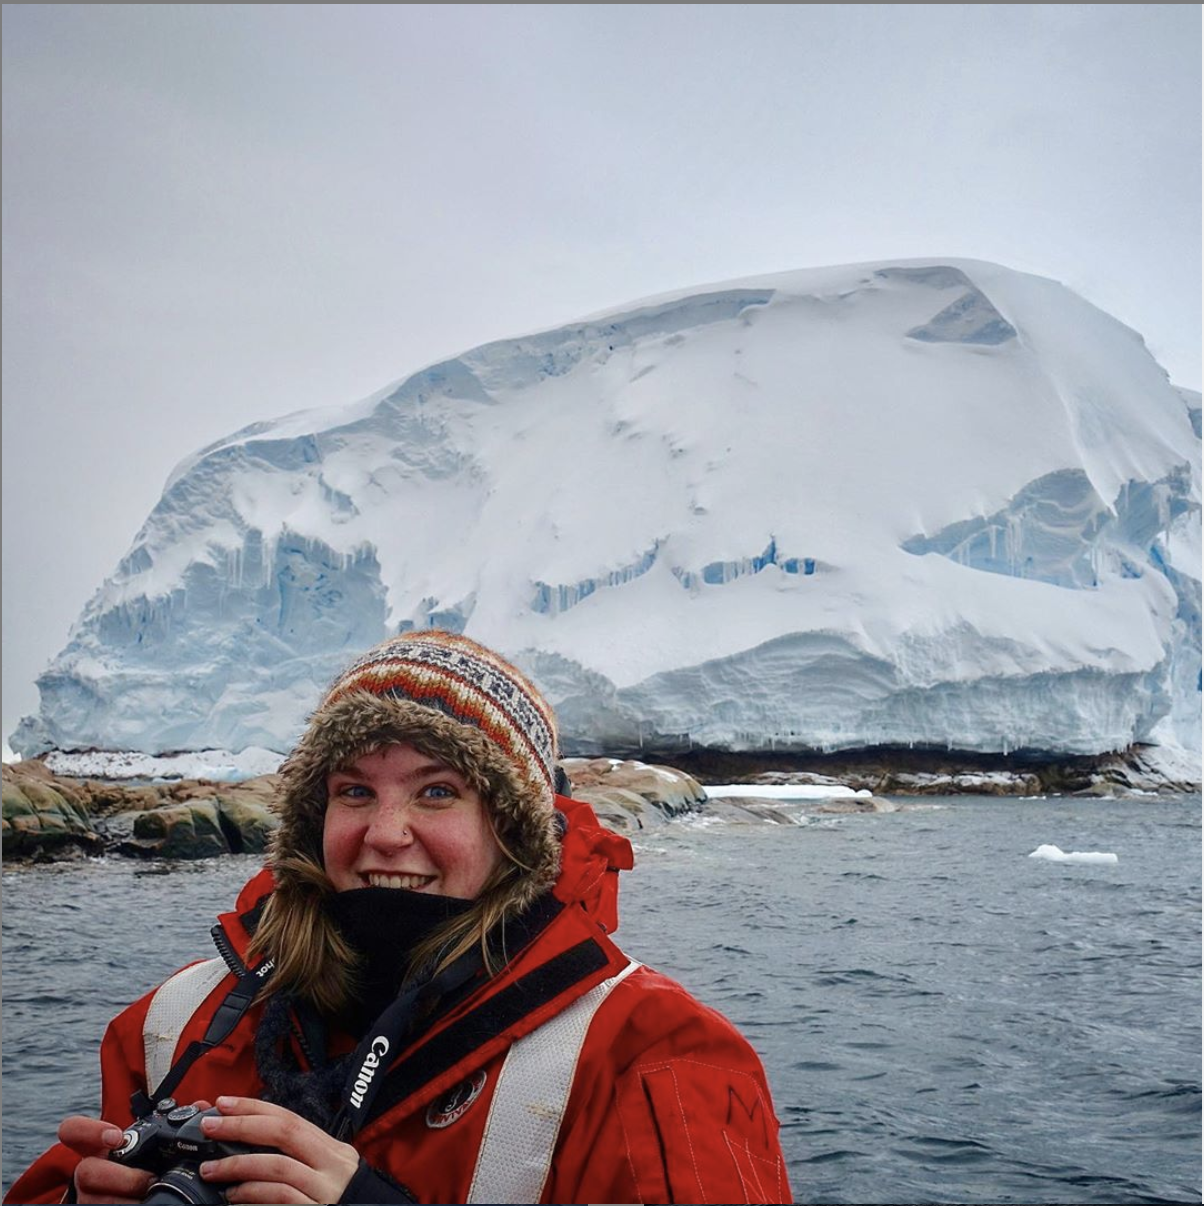 Sitting in front of the recently discovered Sif Island in the Amundsen Sea, Antarctica!